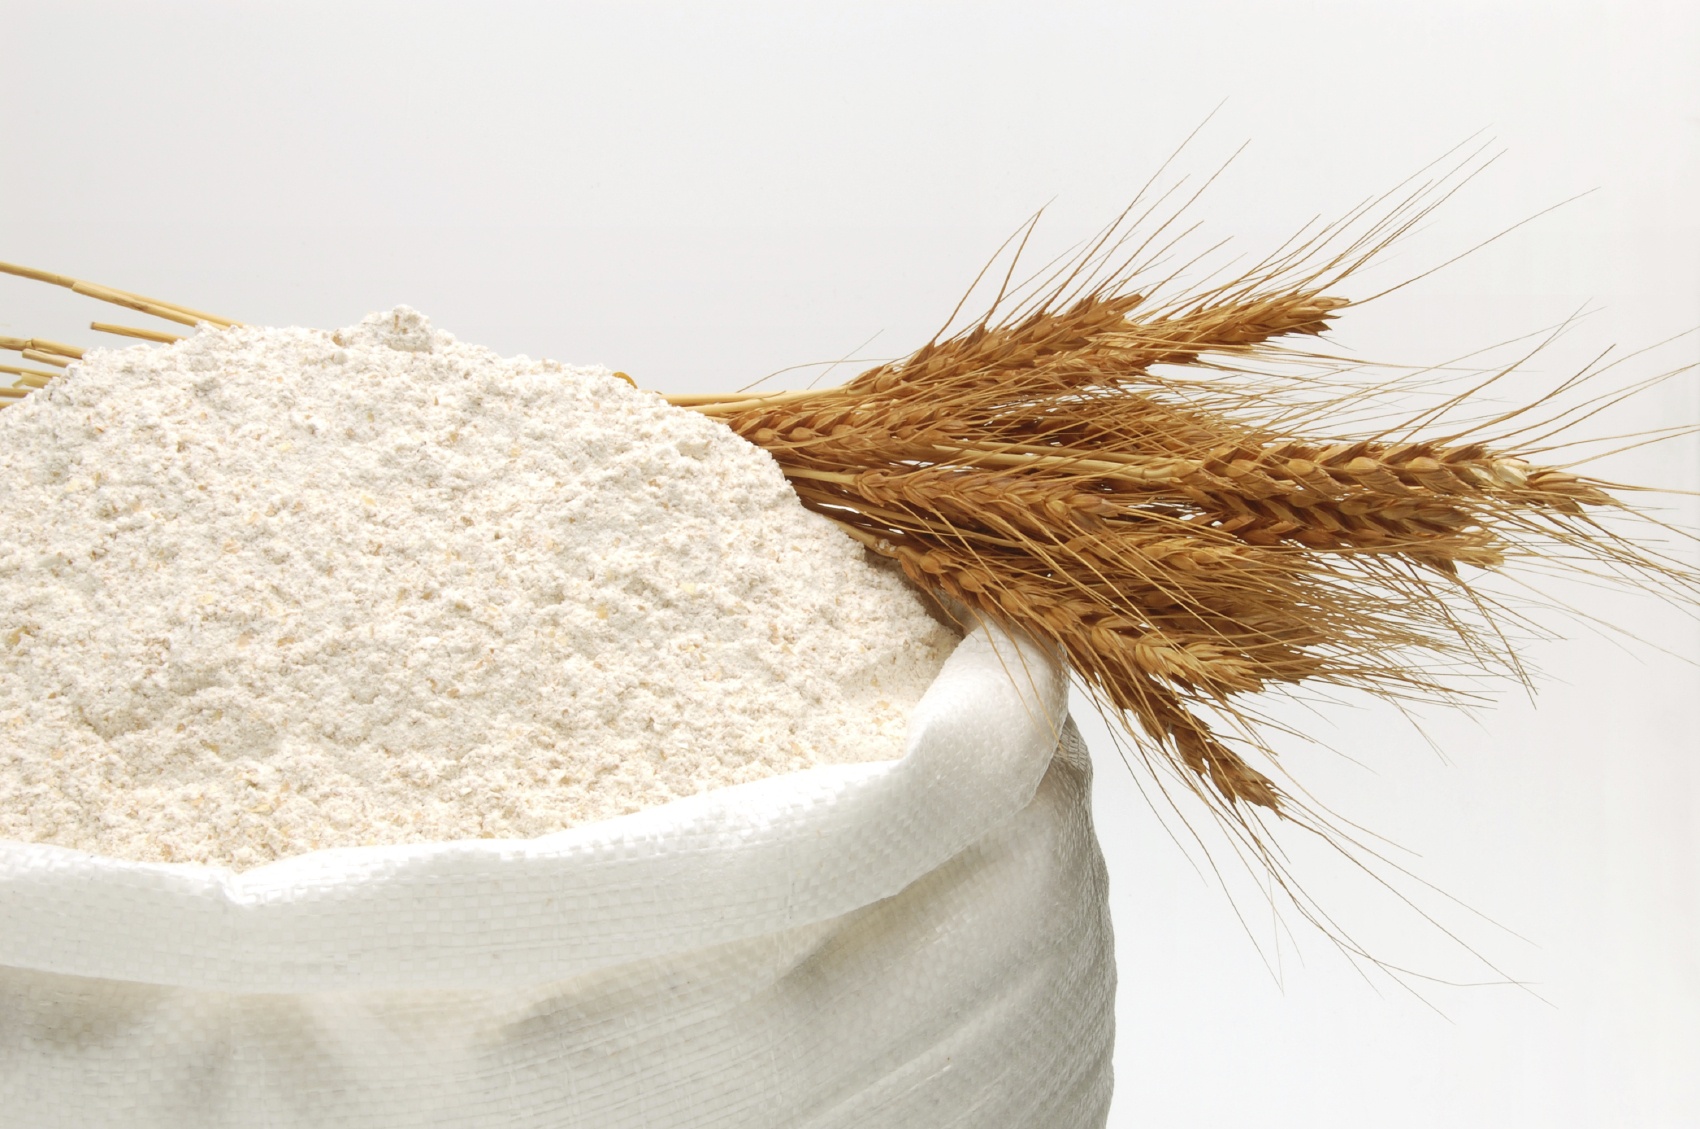 Flour price rises while export shares are decreasing